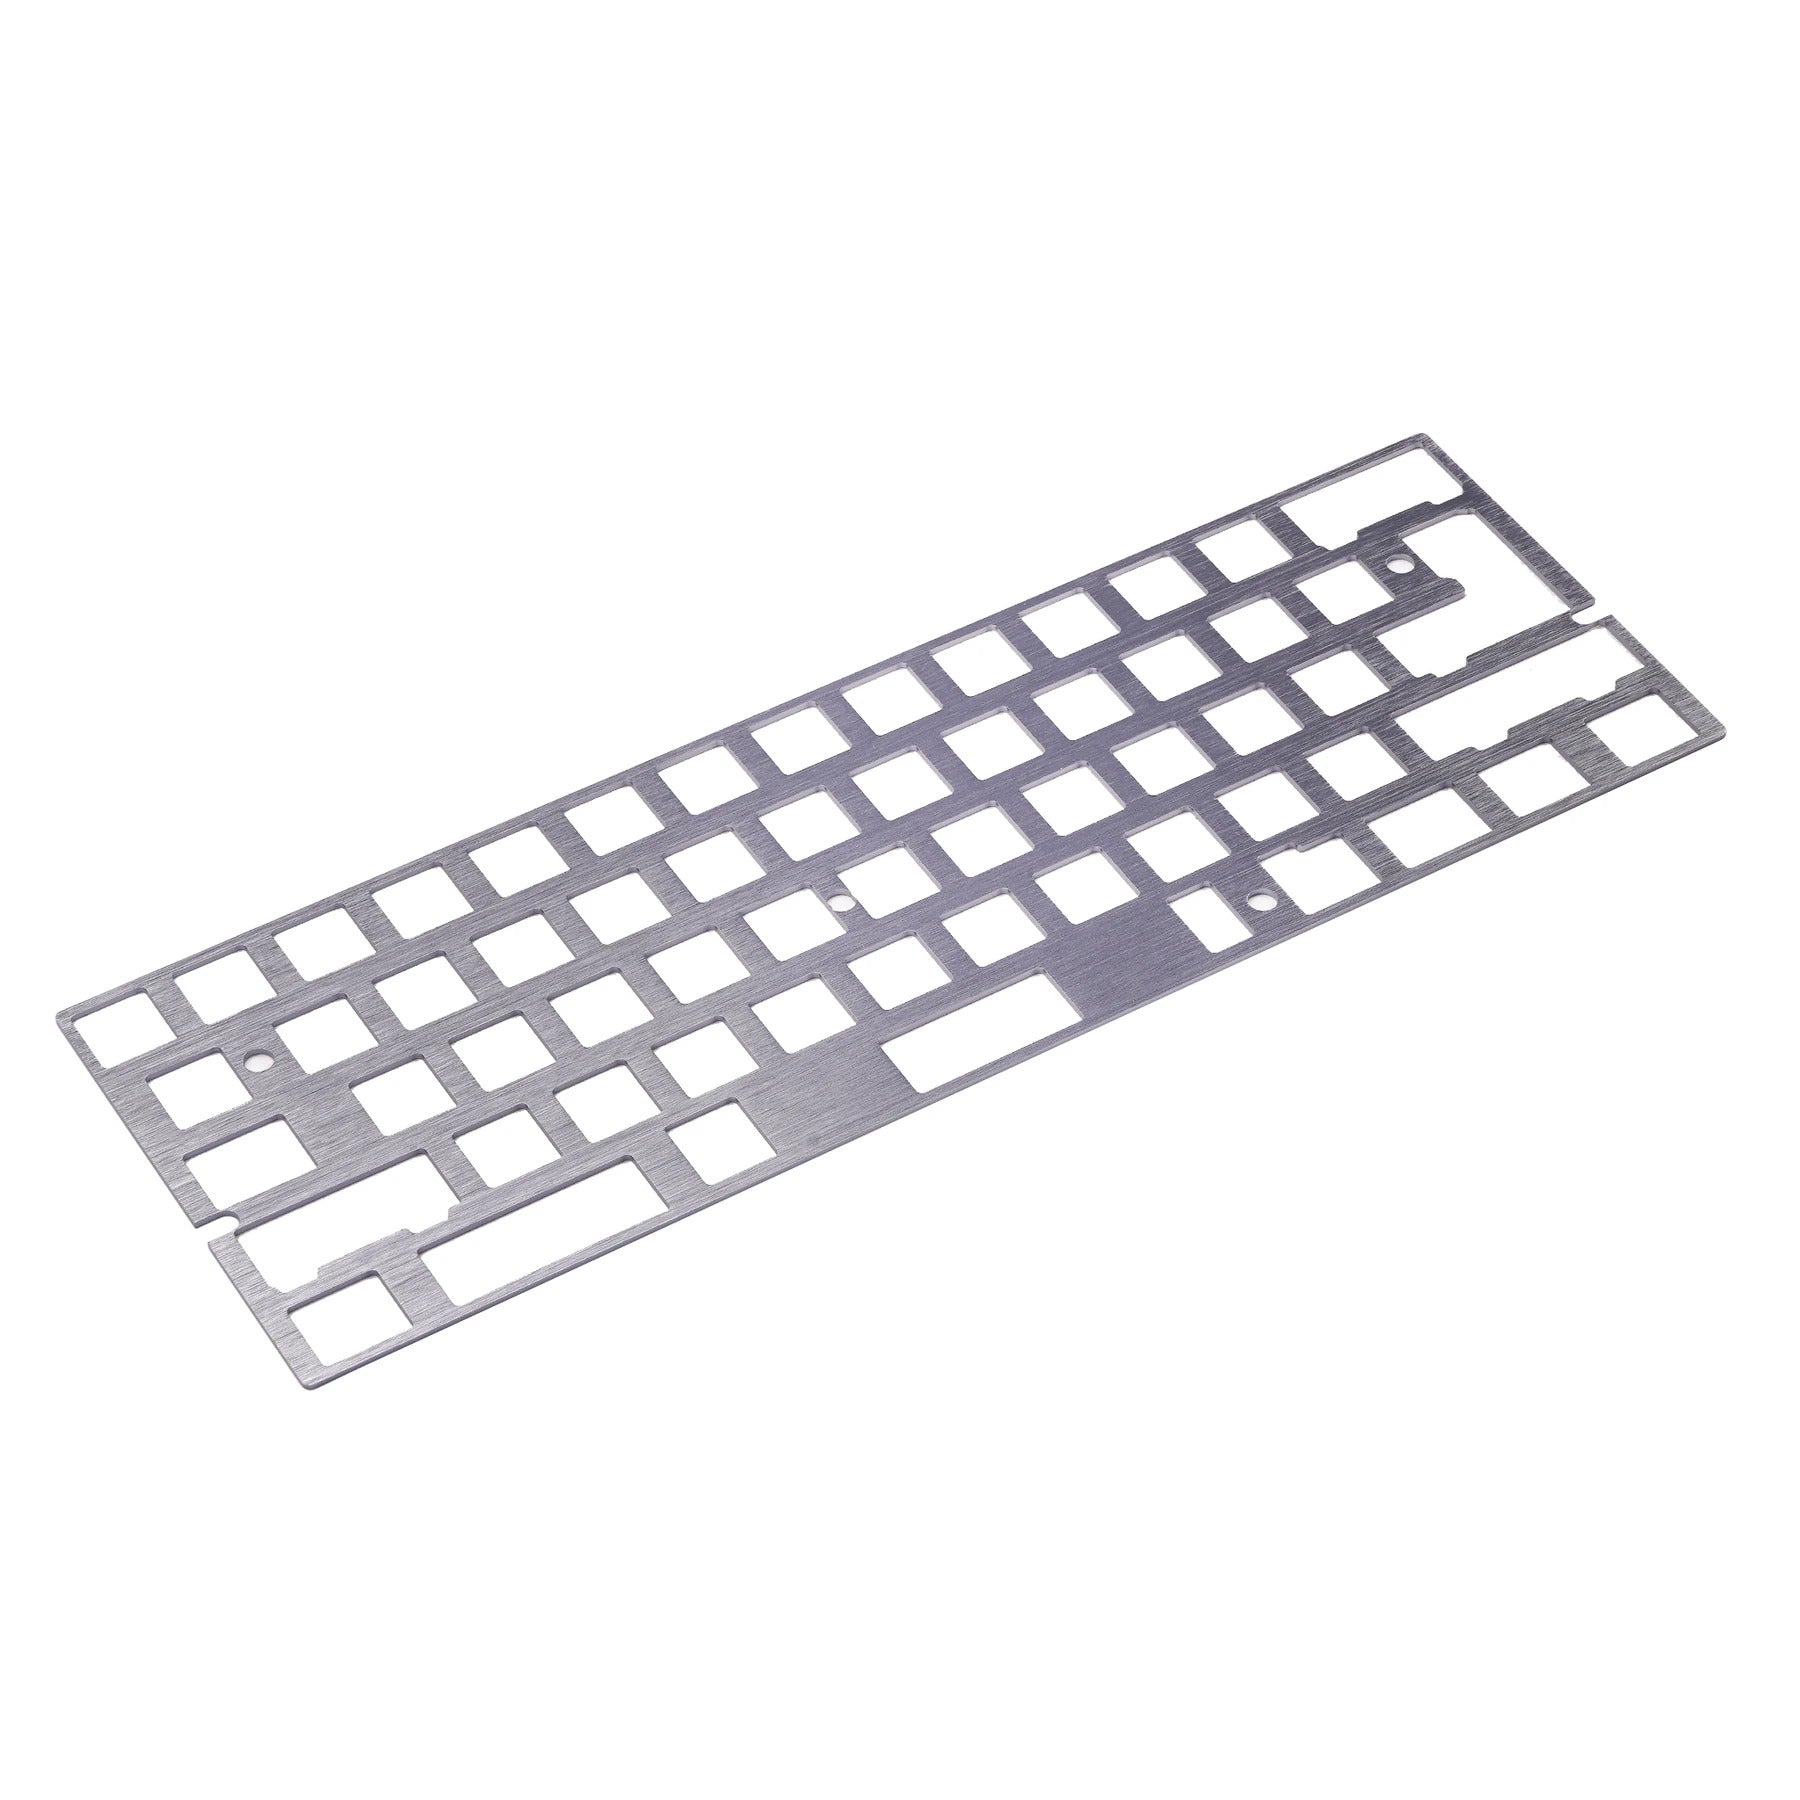 Grey universal 60% aluminium keyboard plate that supports most typical 60% layouts.